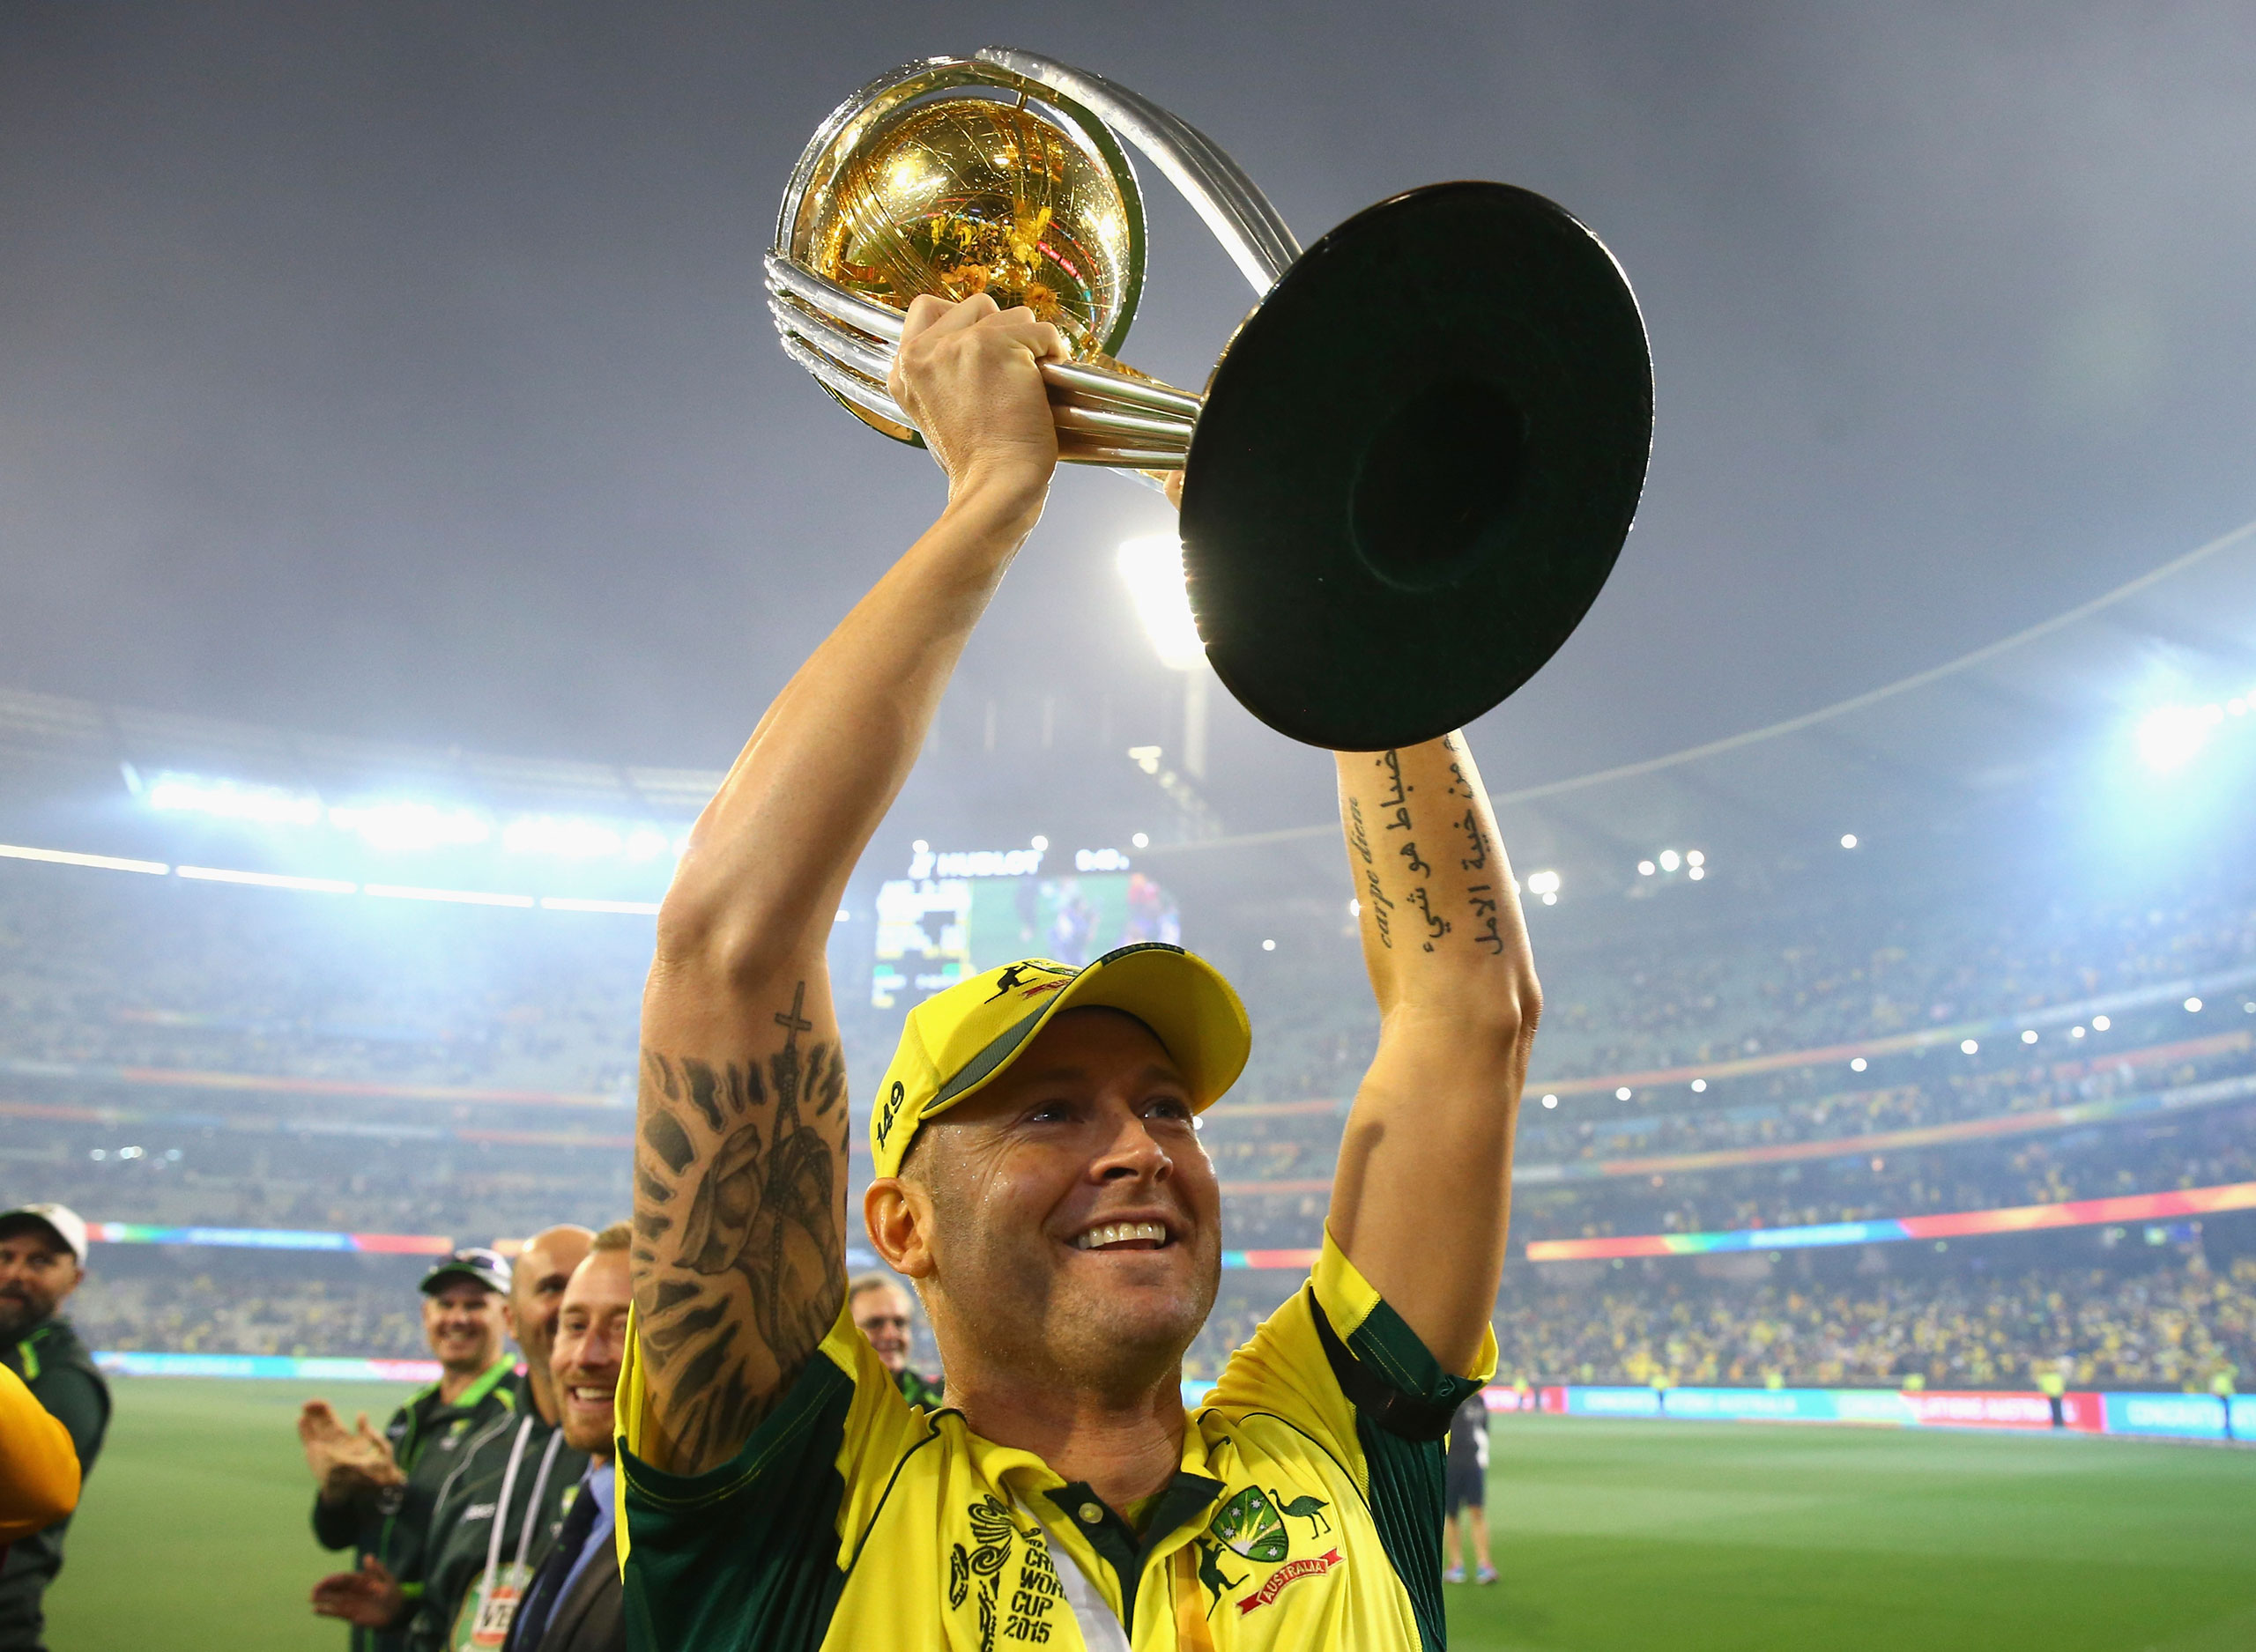 Michael Clarke of Australia celebrates with the trophy during the 2015 ICC Cricket World Cup final match between Australia and New Zealand at Melbourne Cricket Ground on March 29, 2015 in Melbourne. (Ryan Pierse—Getty Images)